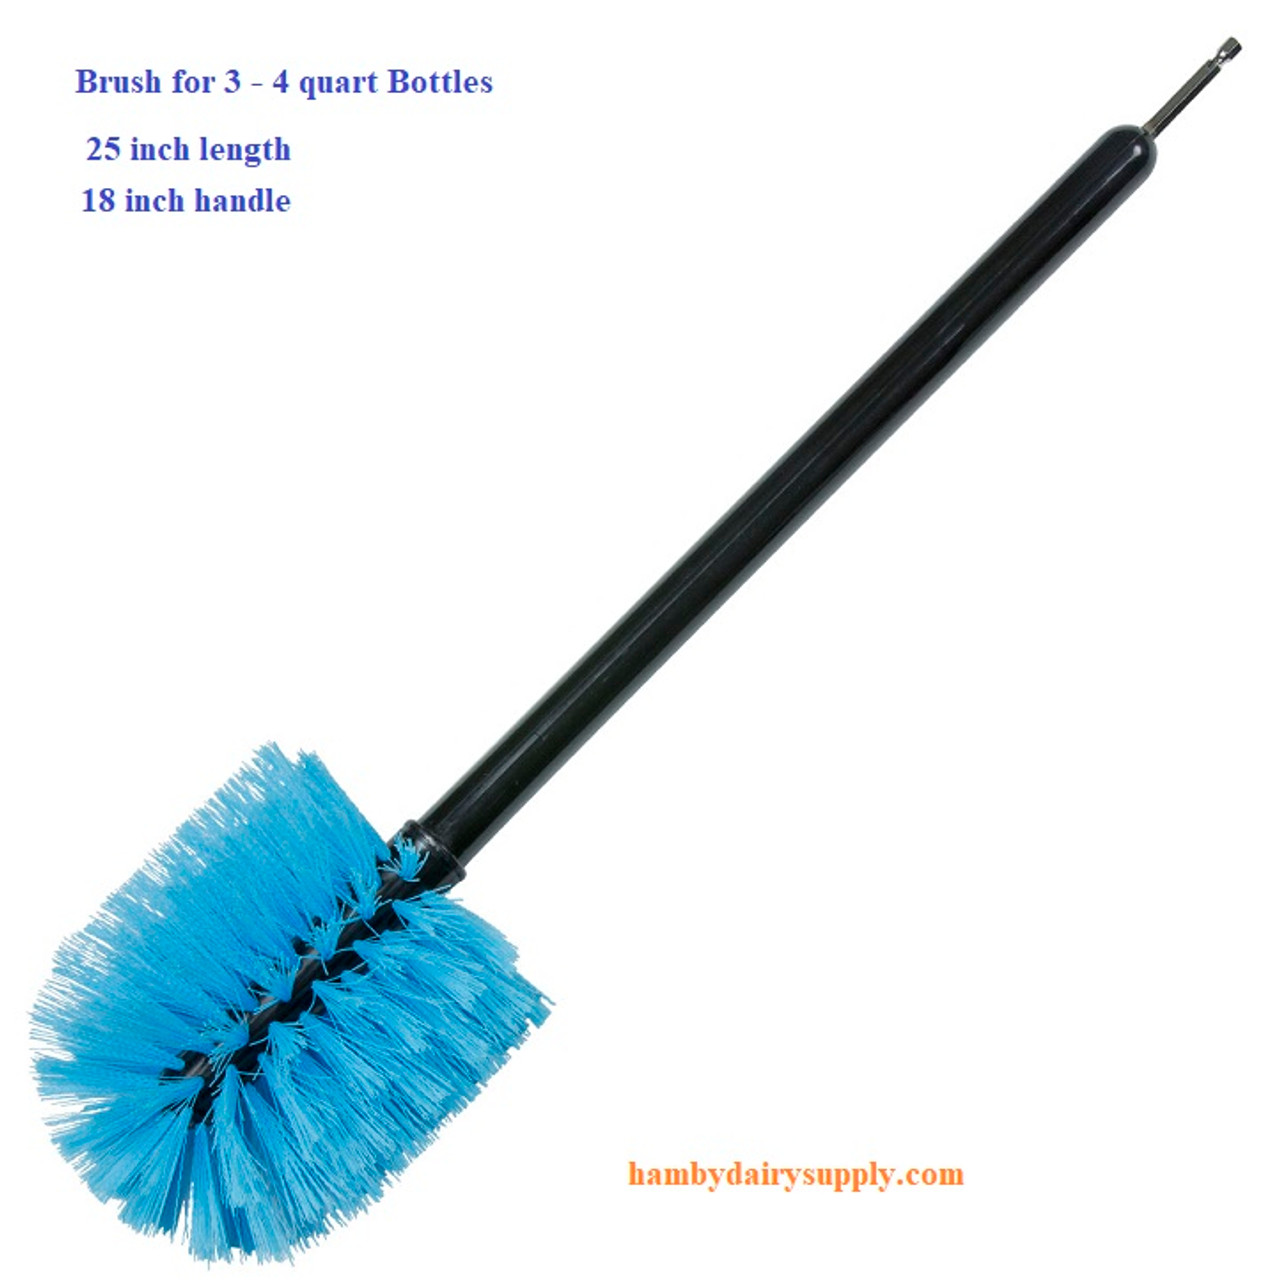 4 Pieces Cleaning Brush Small Scrub Brush for Cleaning Bottle Sink